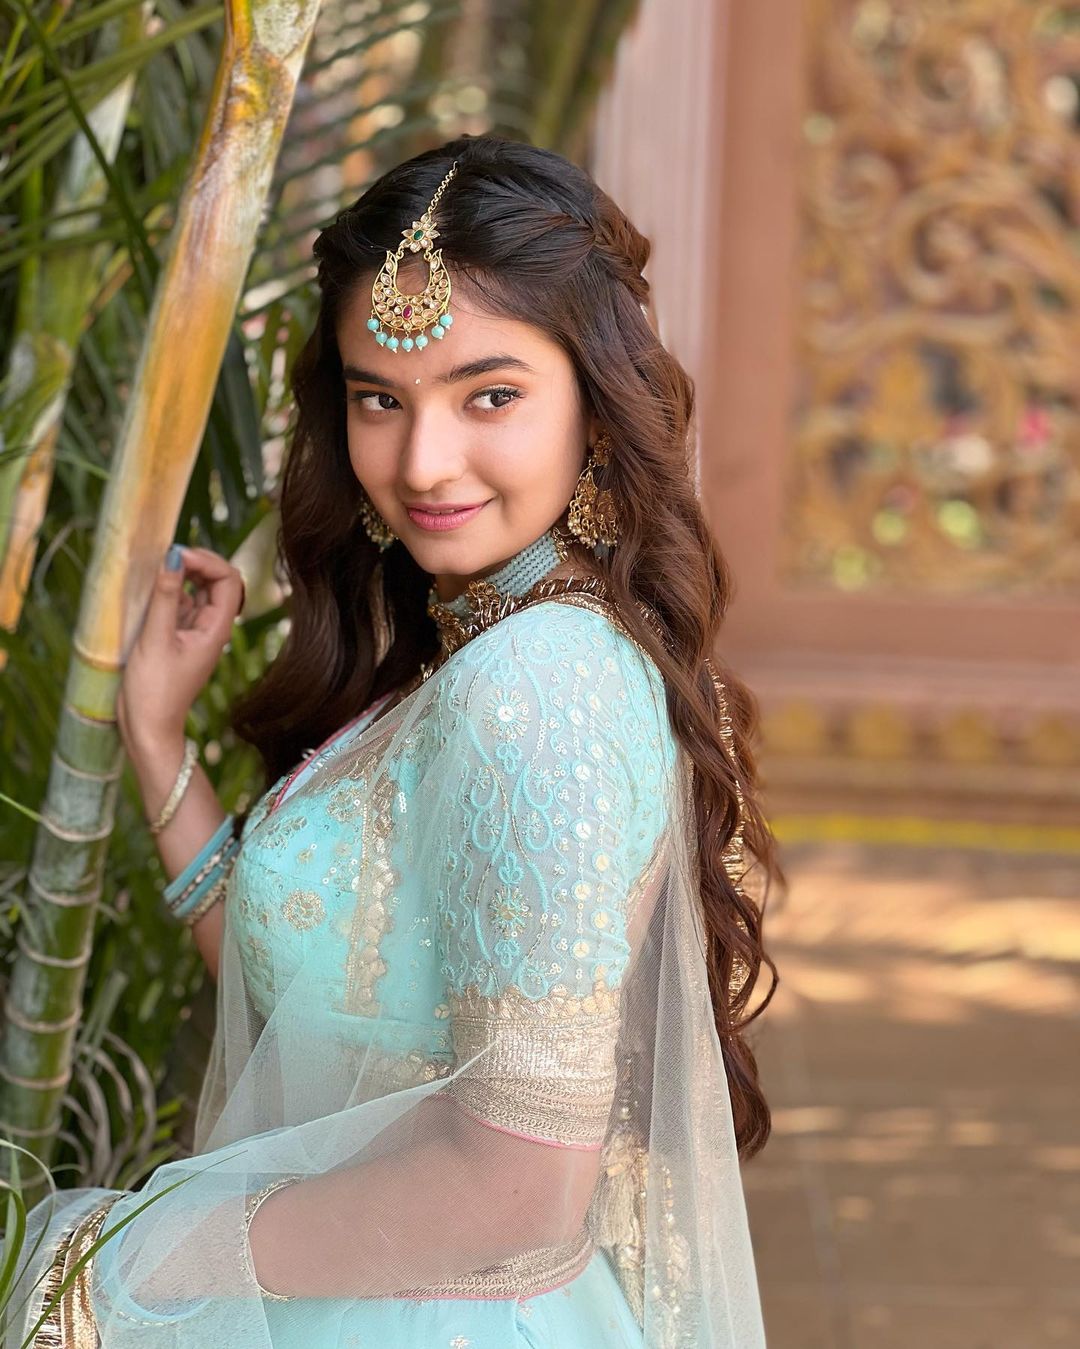 From Anushka Sen, Avneet Kaur to Jannat Zubair Rahmani: The traditional looks of these actresses rocked the hearts of fans 9588